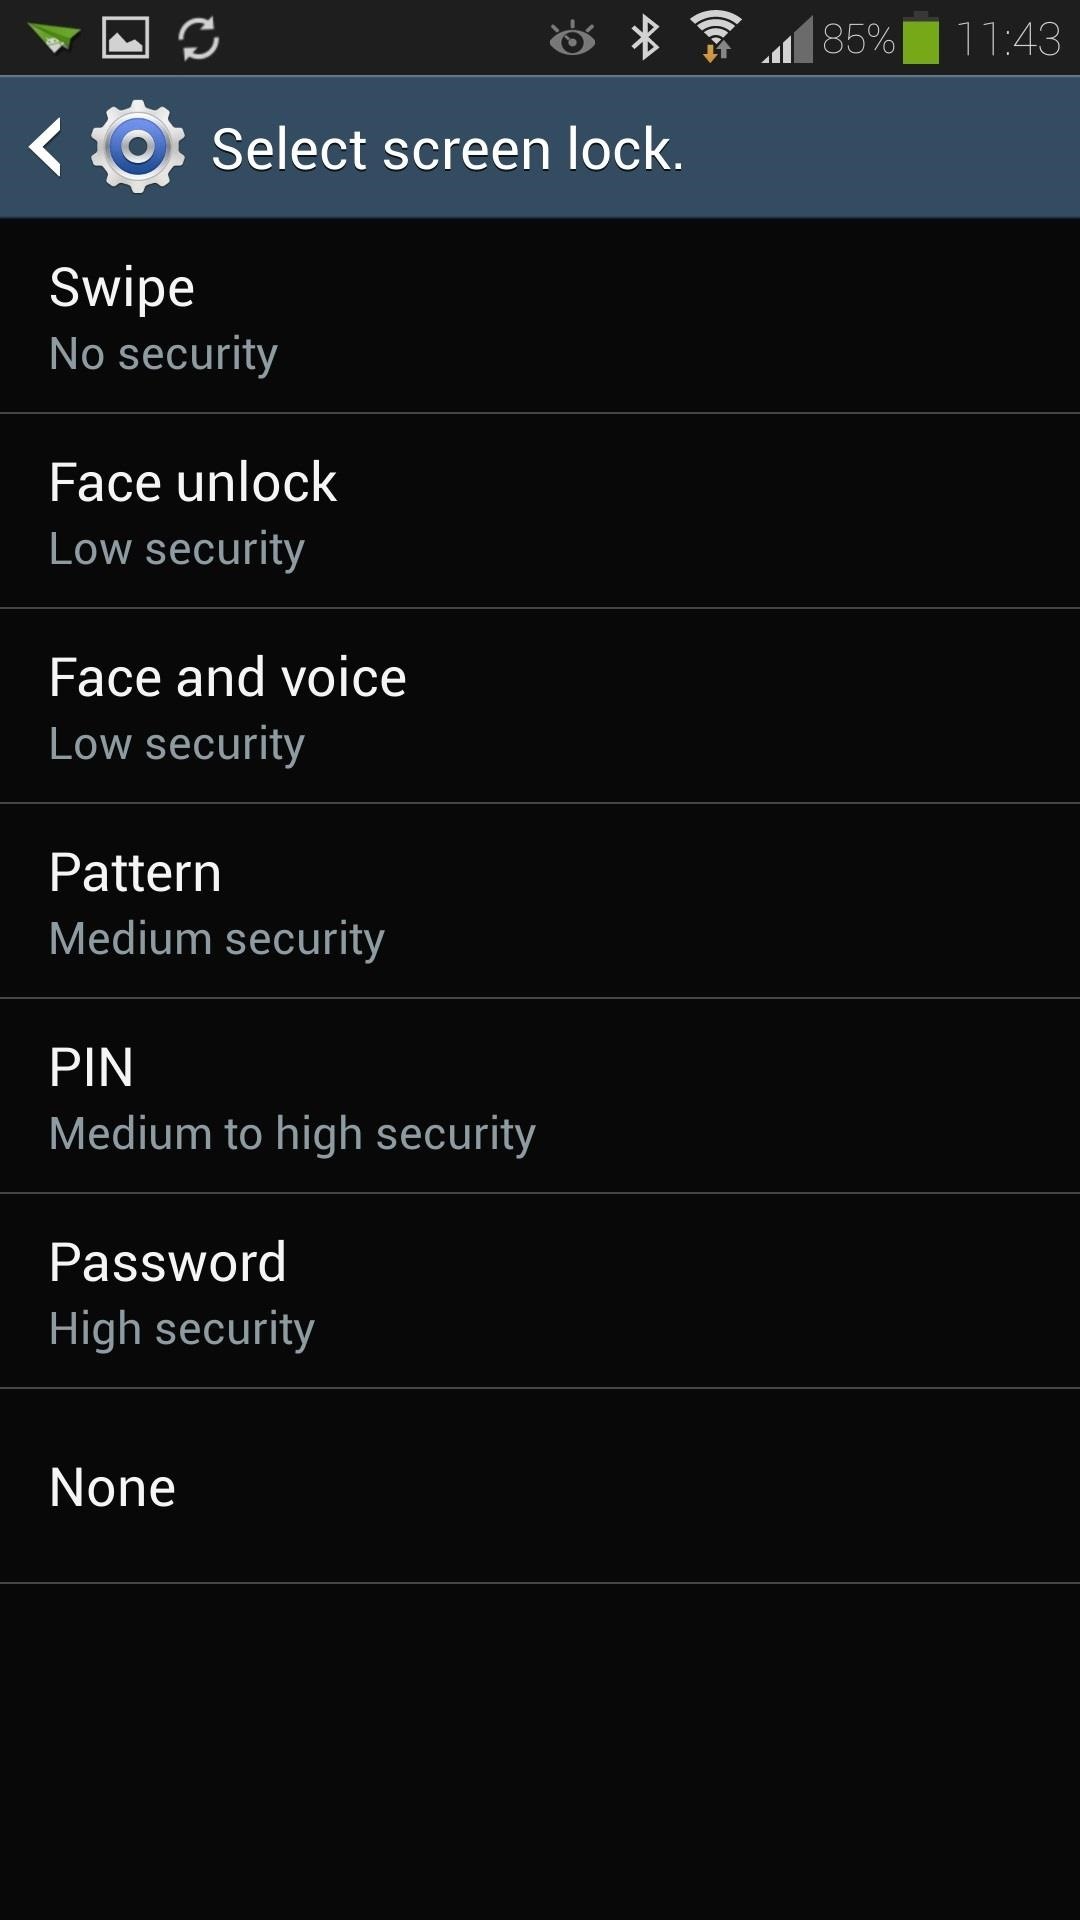 How to Get Faster PIN-Unlock on Your Samsung Galaxy S4 by Removing the "OK" Step